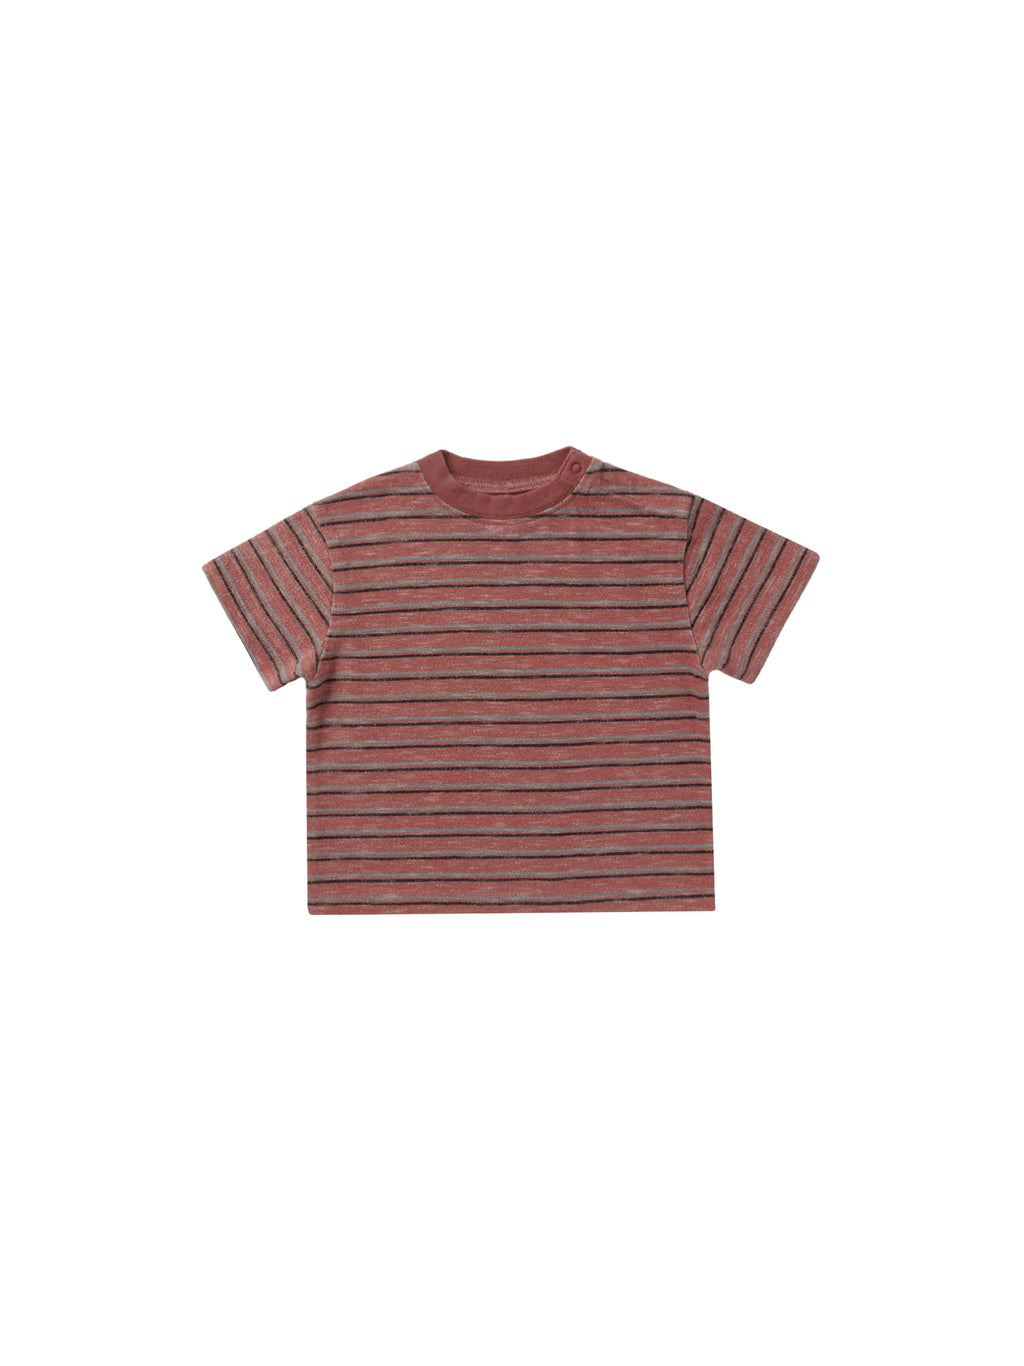 Relaxed Tee || Red Multi-Stripe